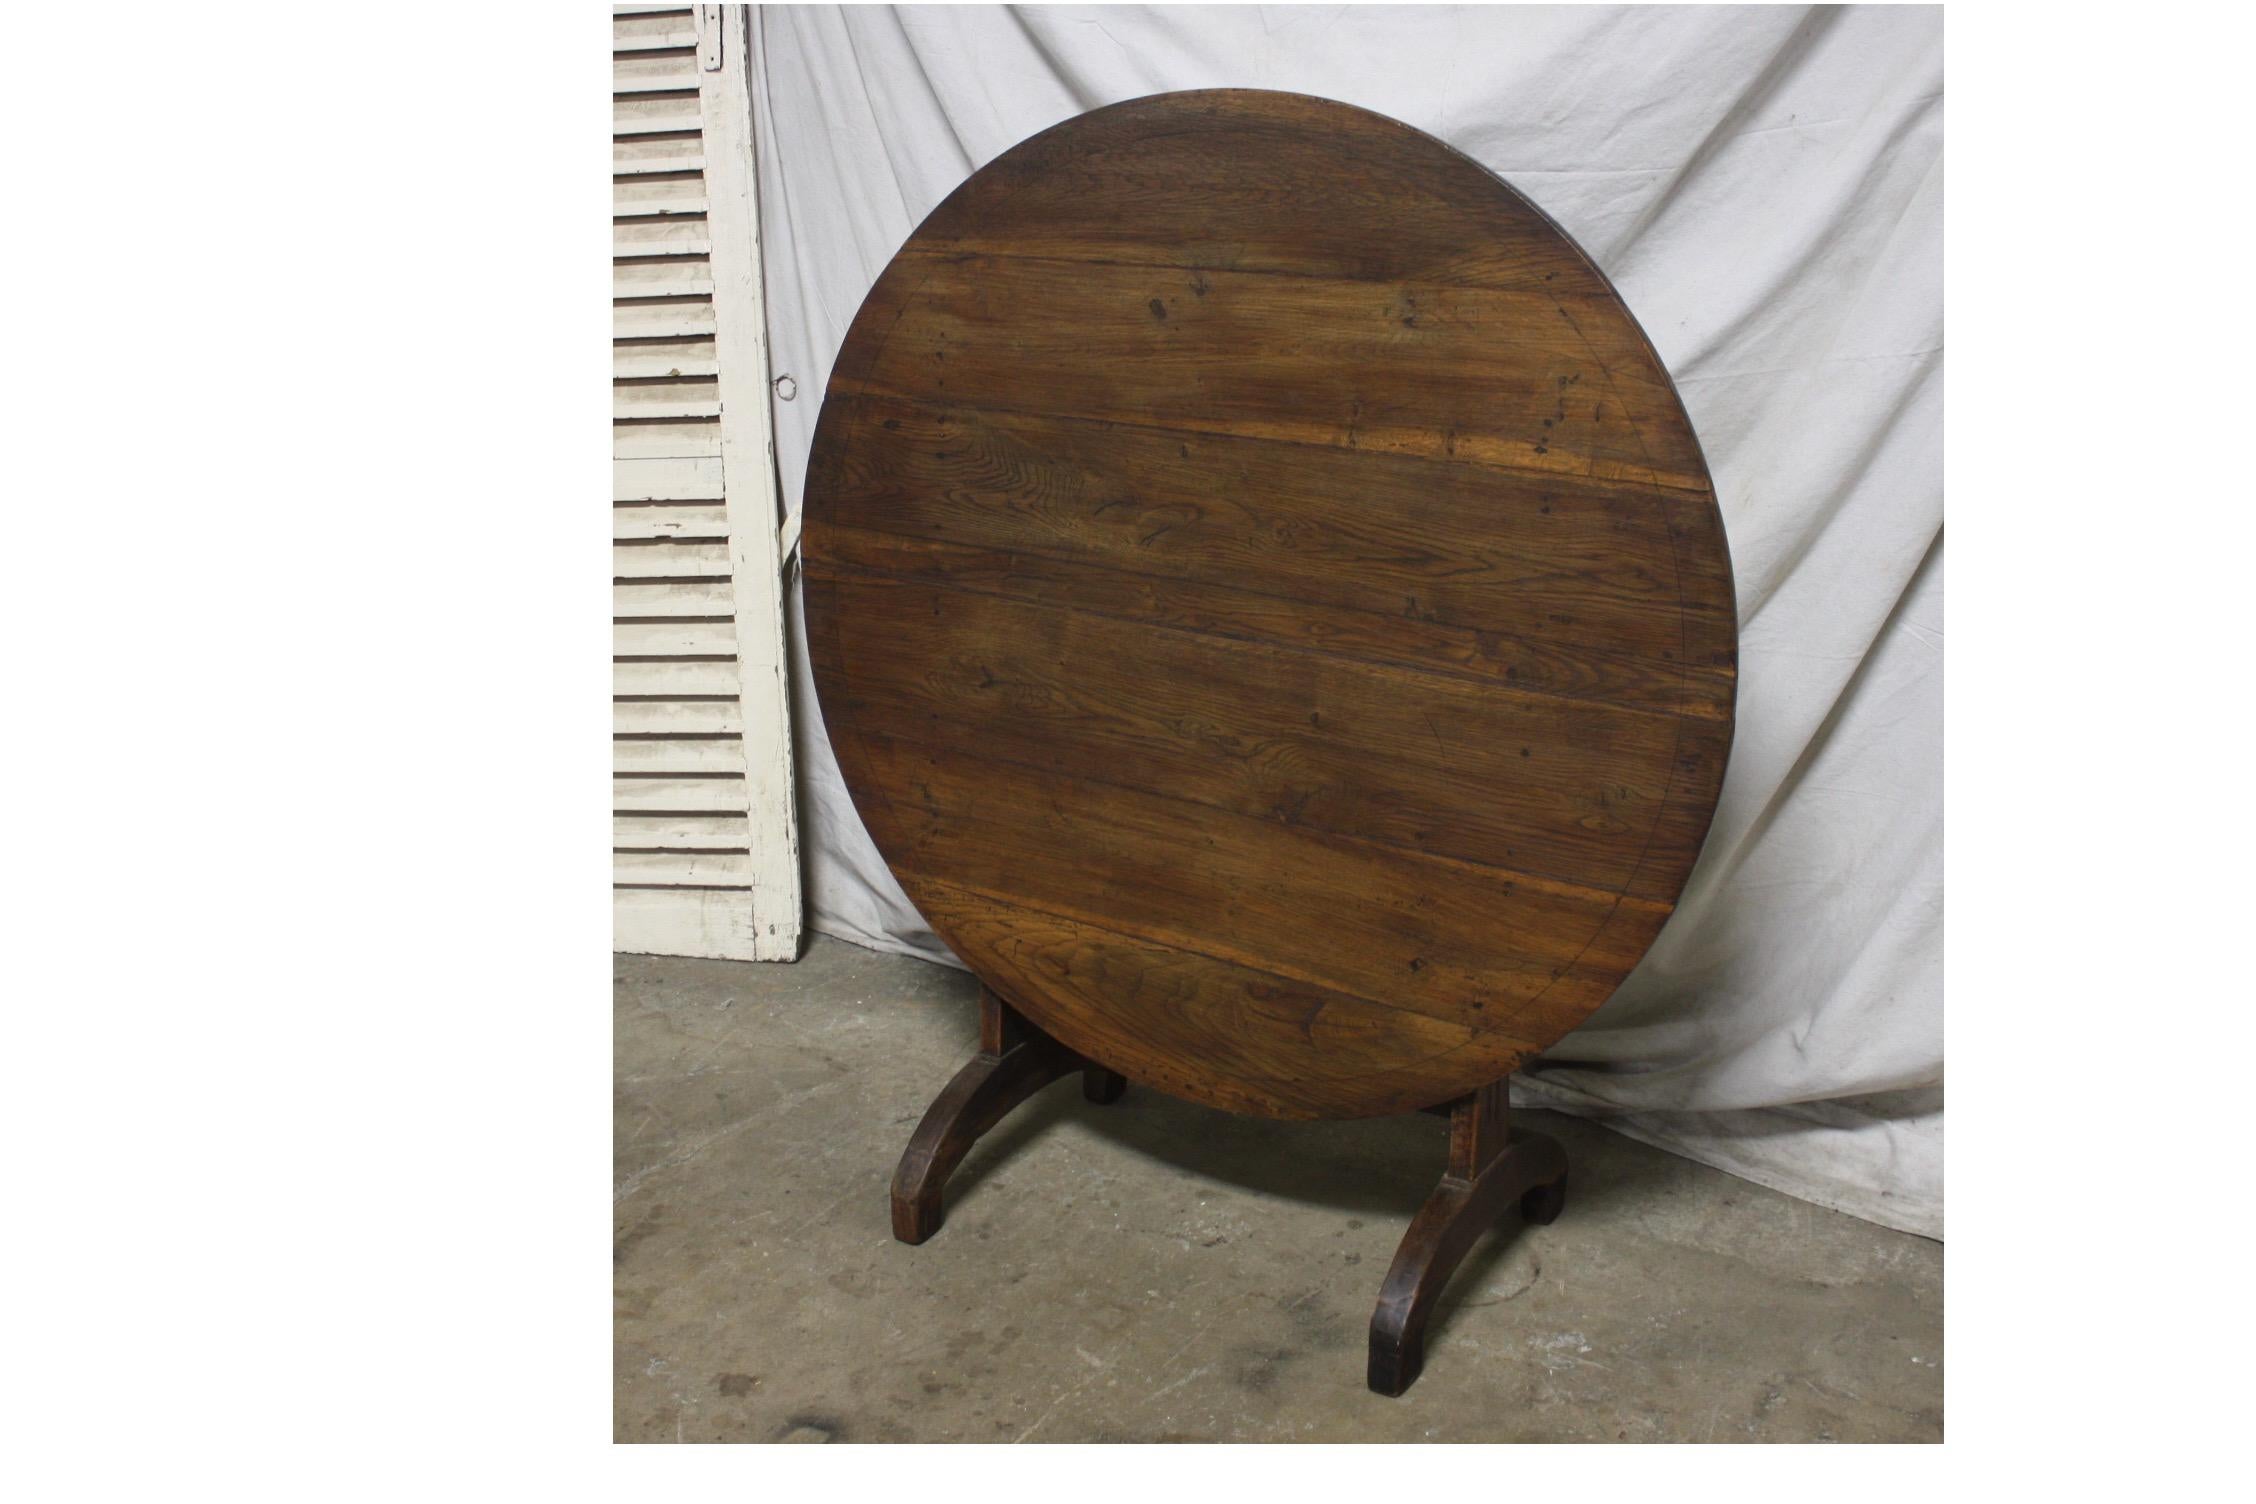 Early 19th century French tilt-top table.